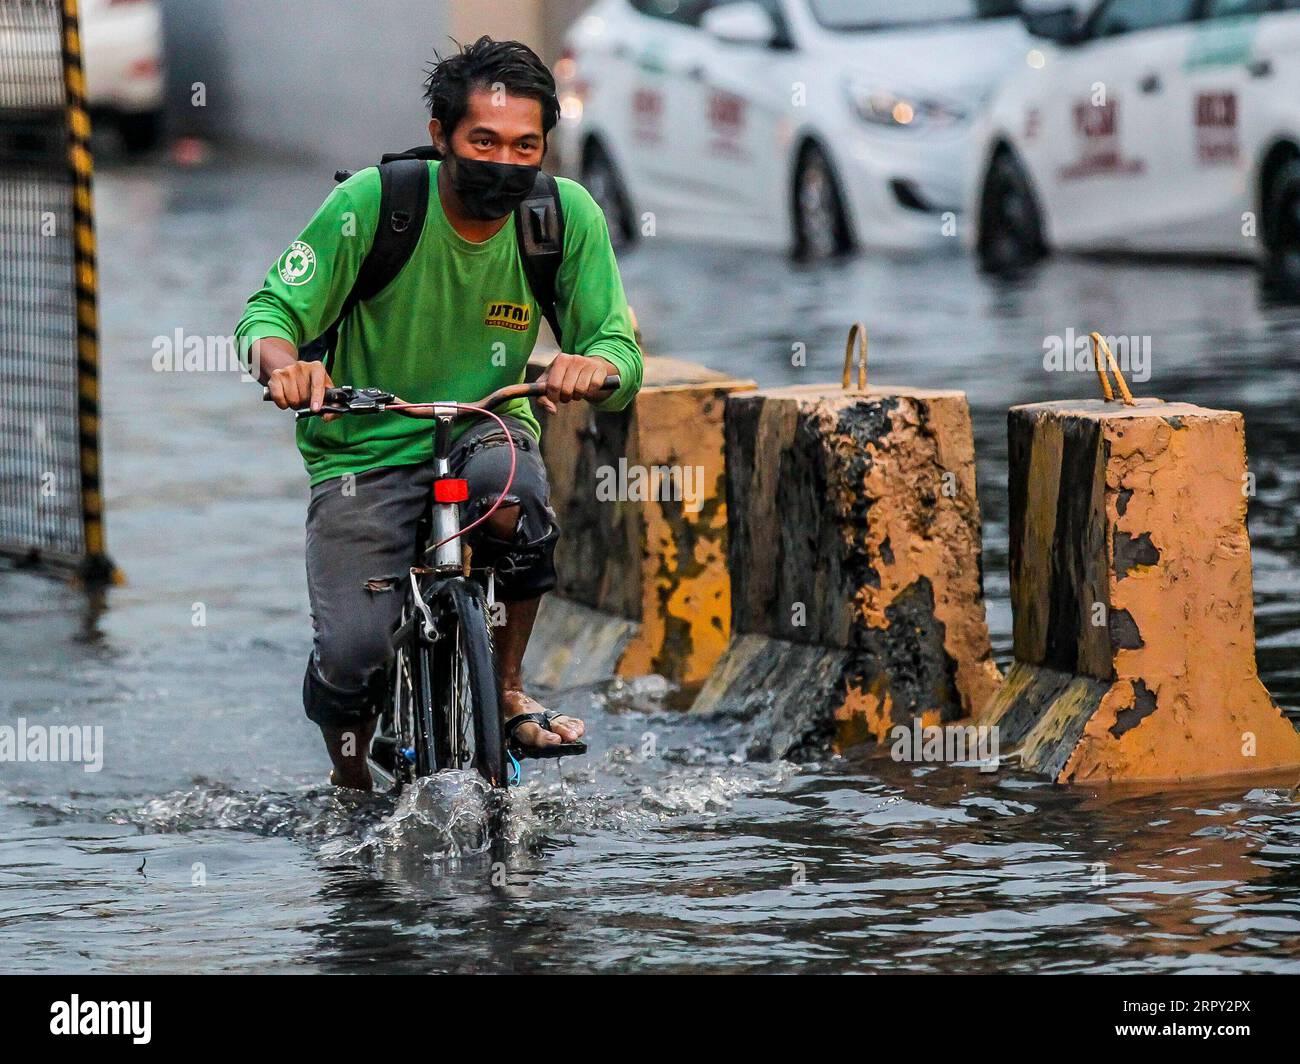 200611 -- MANILA, June 11, 2020 -- A man rides his bicycle through a flooded area caused by the heavy rain from the tropical depression locally named Butchoy in Manila, the Philippines, on June 11, 2020.  PHILIPPINES-MANILA-TROPICAL DEPRESSION BUTCHOY ROUELLExUMALI PUBLICATIONxNOTxINxCHN Stock Photo